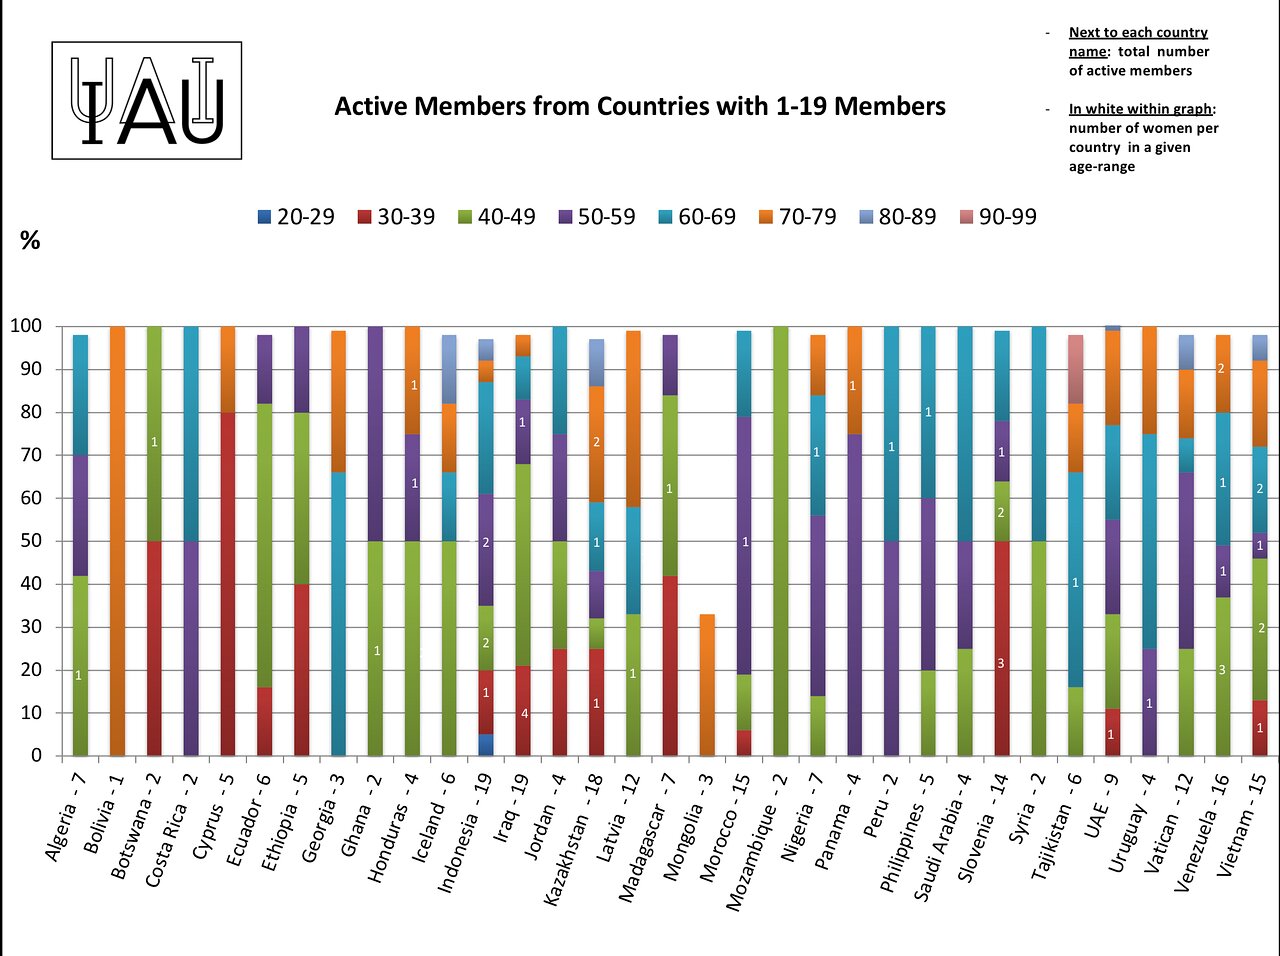 Active members from countries with 1-19 members